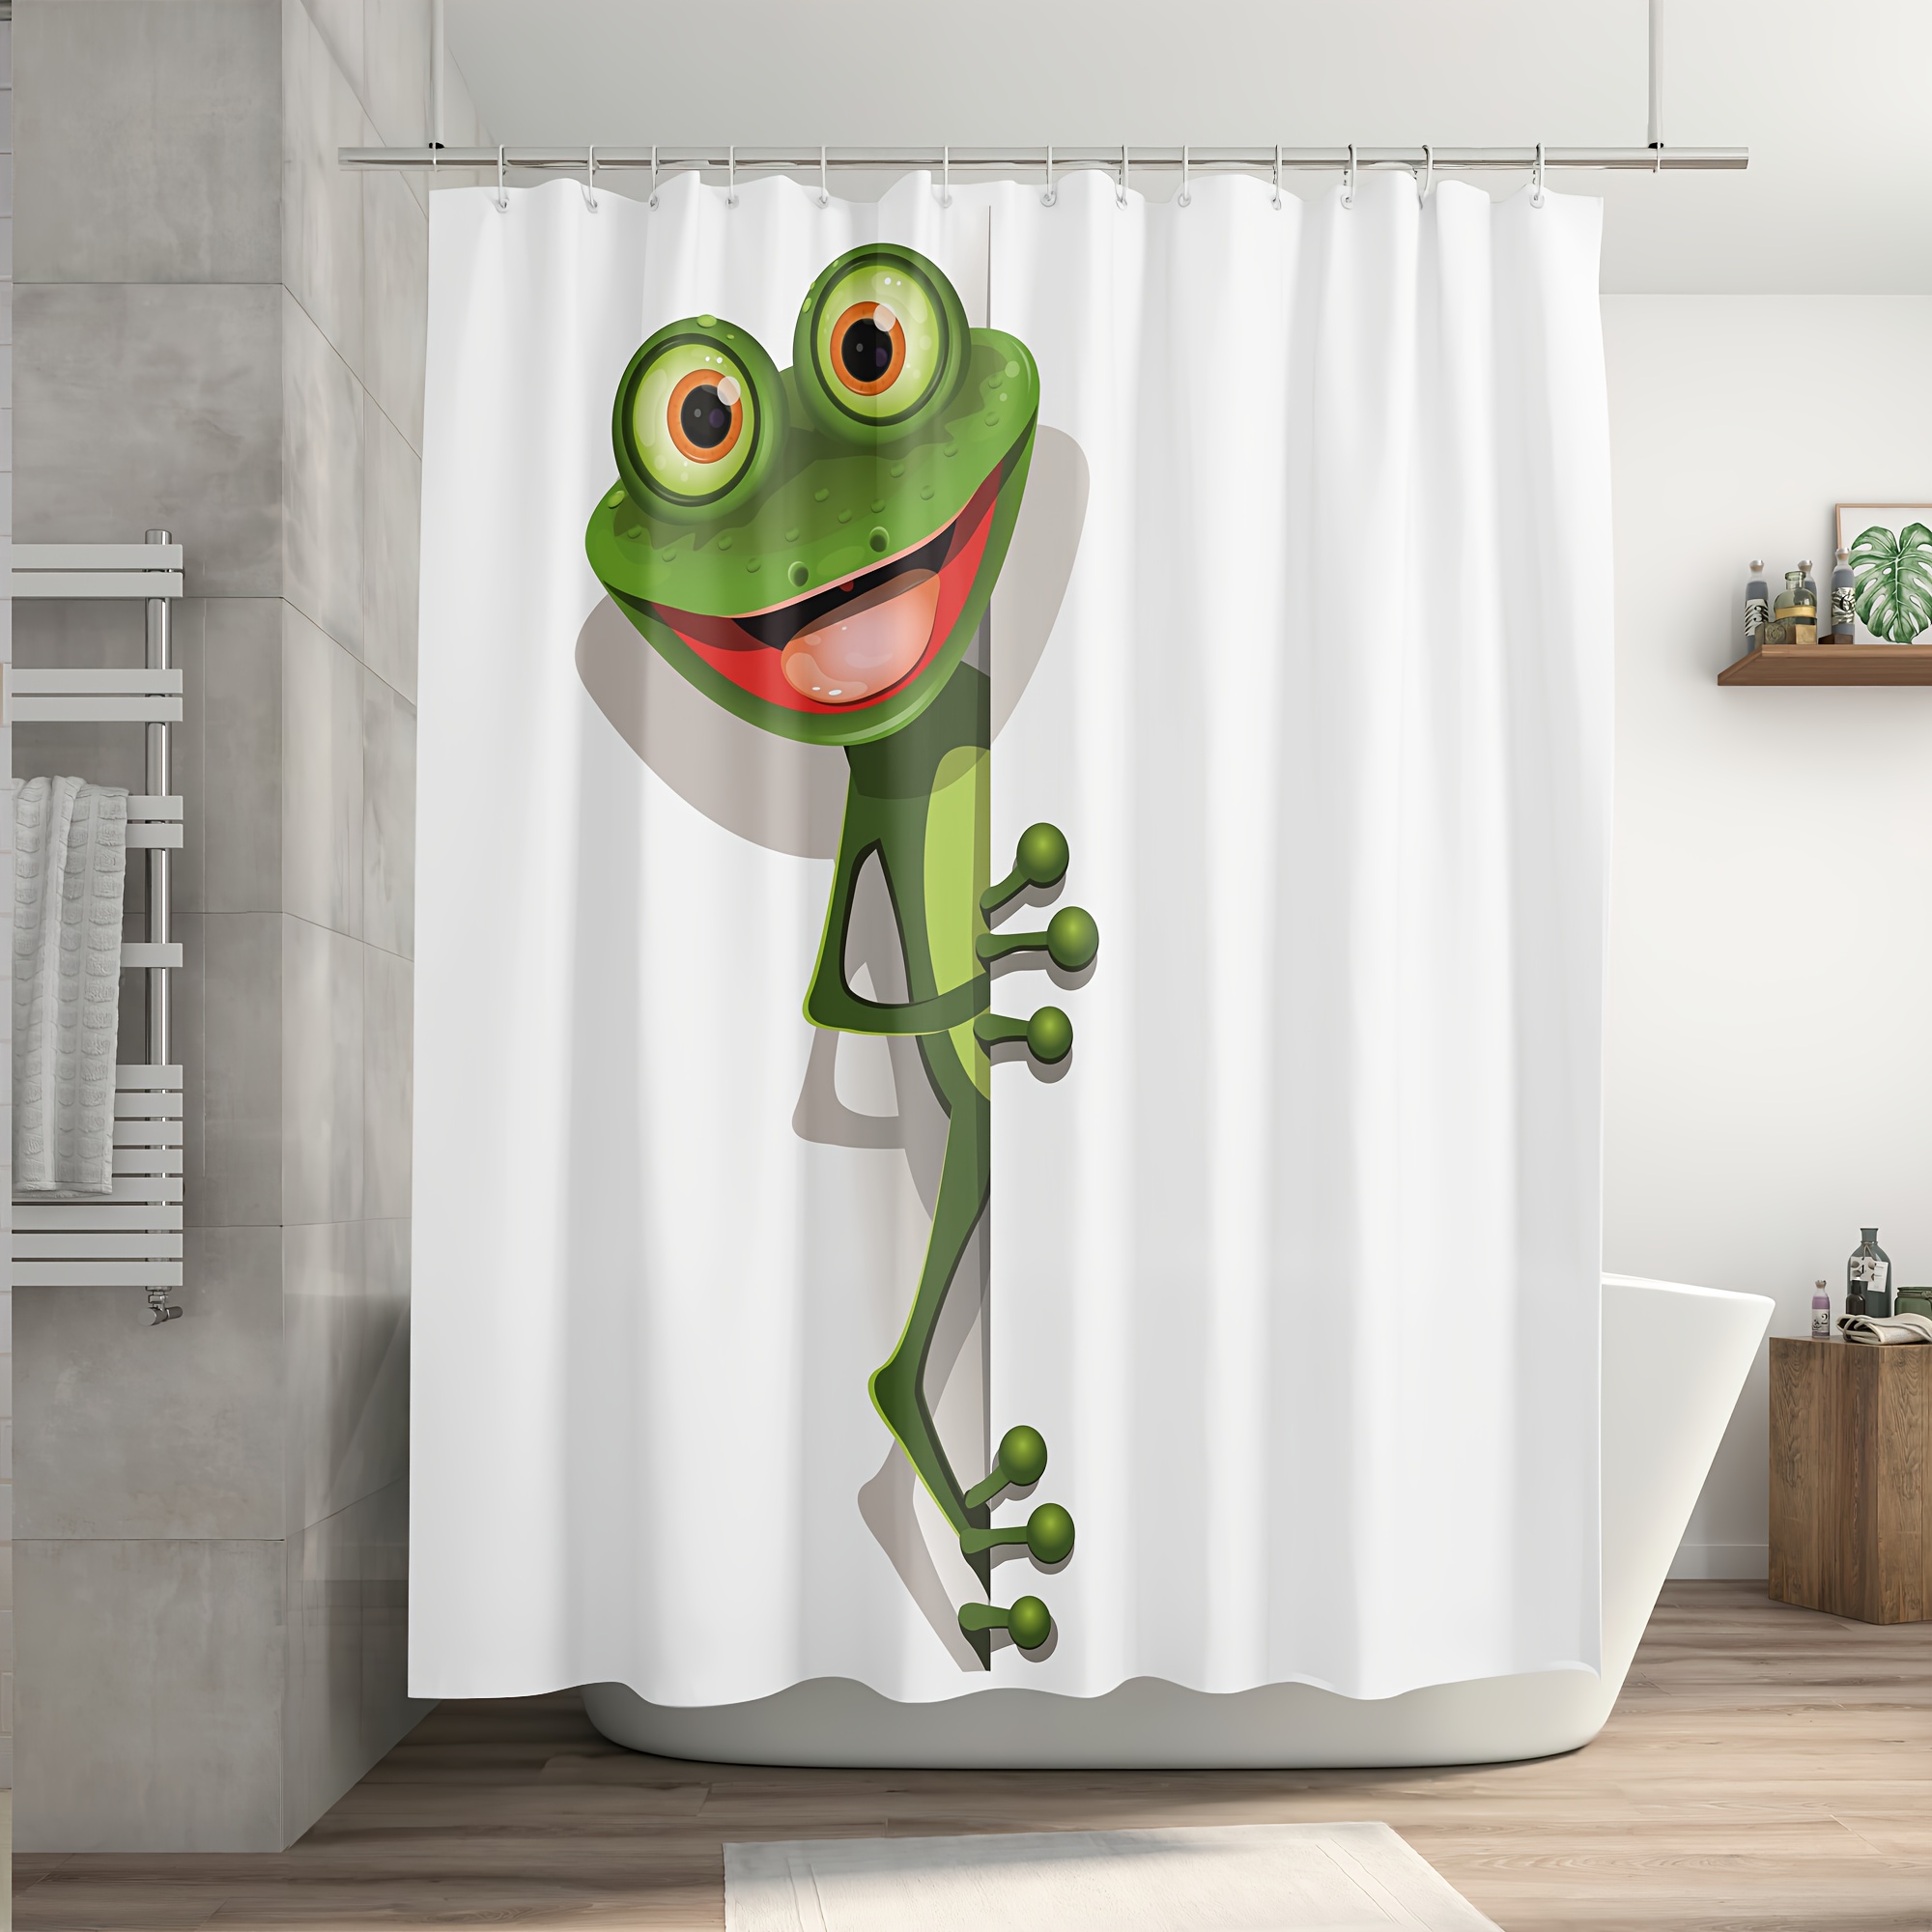 Whim-Wham Funny Frog Flowers Shower Curtain Cartoon Cute Frog